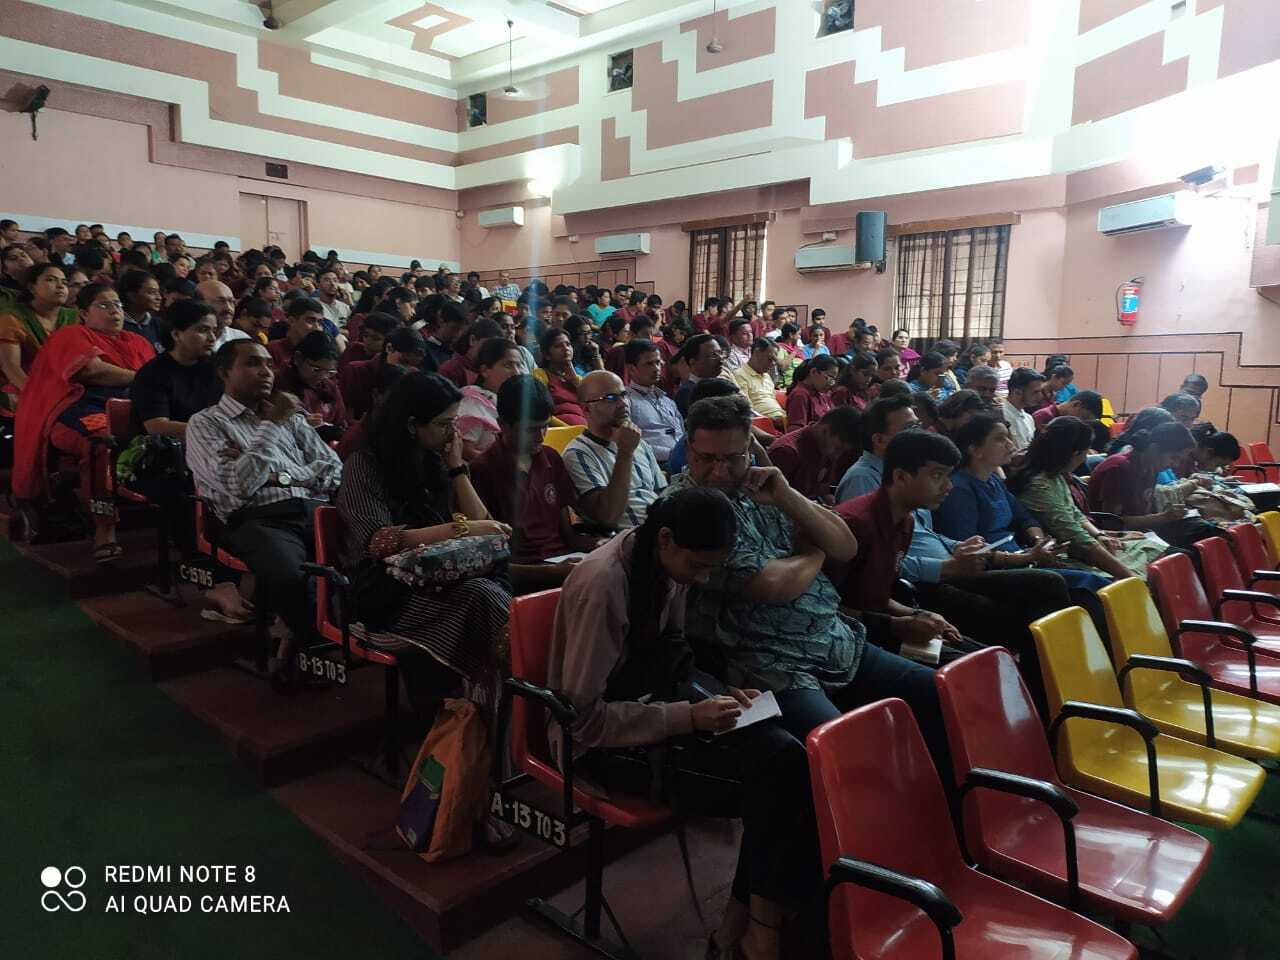 Guest lecture on How I cracked MHT CET exam by Neeraj Pendse